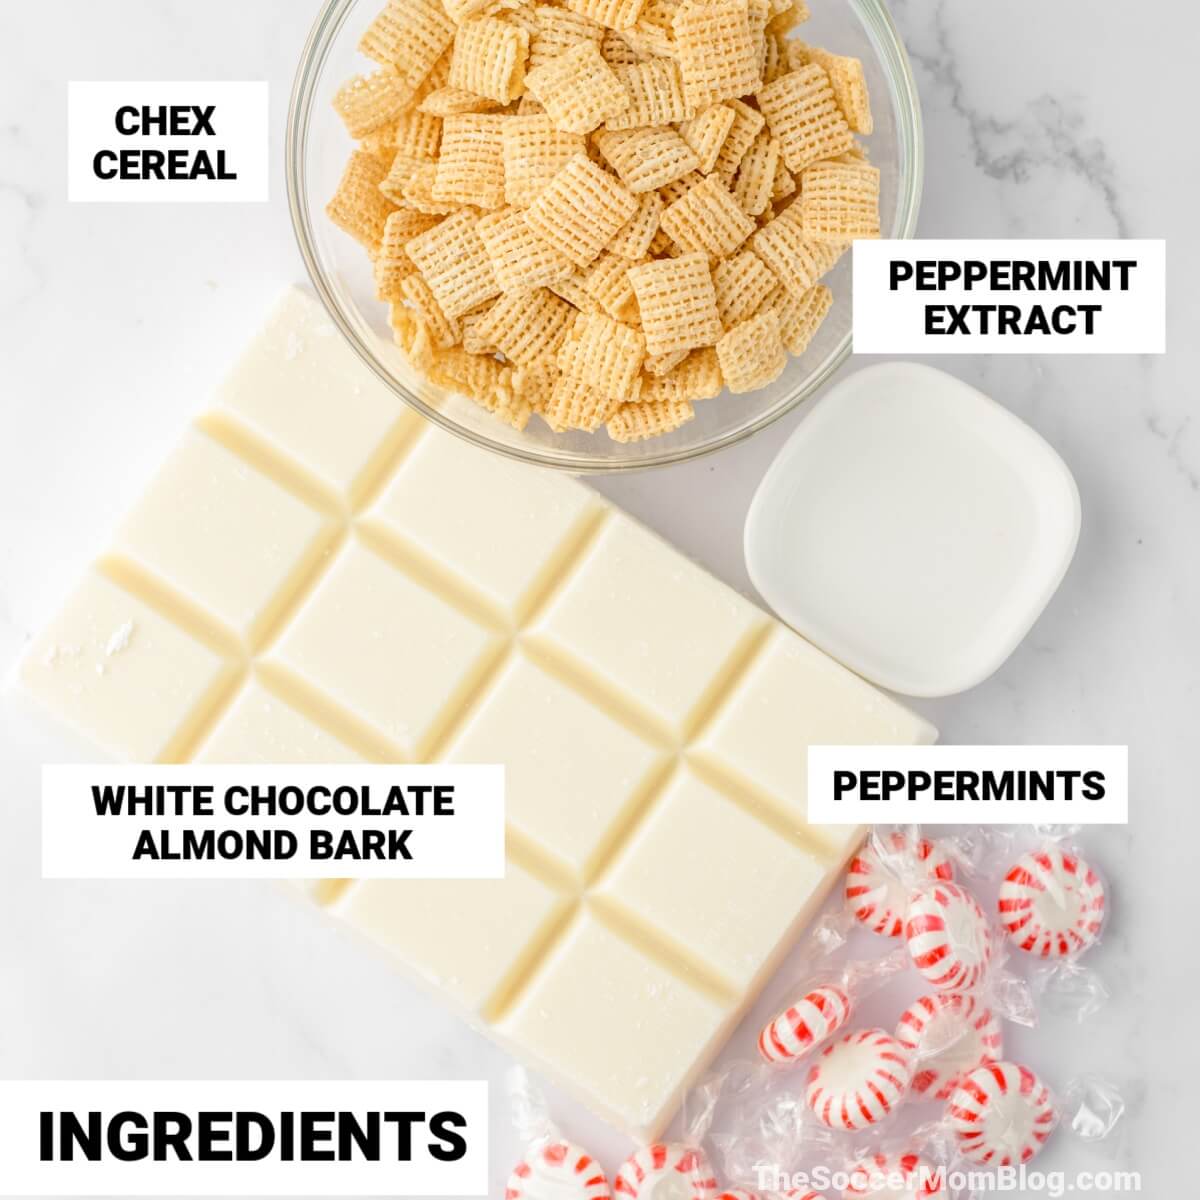 peppermint puppy chow ingredients, with text labels: Chex cereal, peppermint extract, peppermints, white chocolate almond bark.